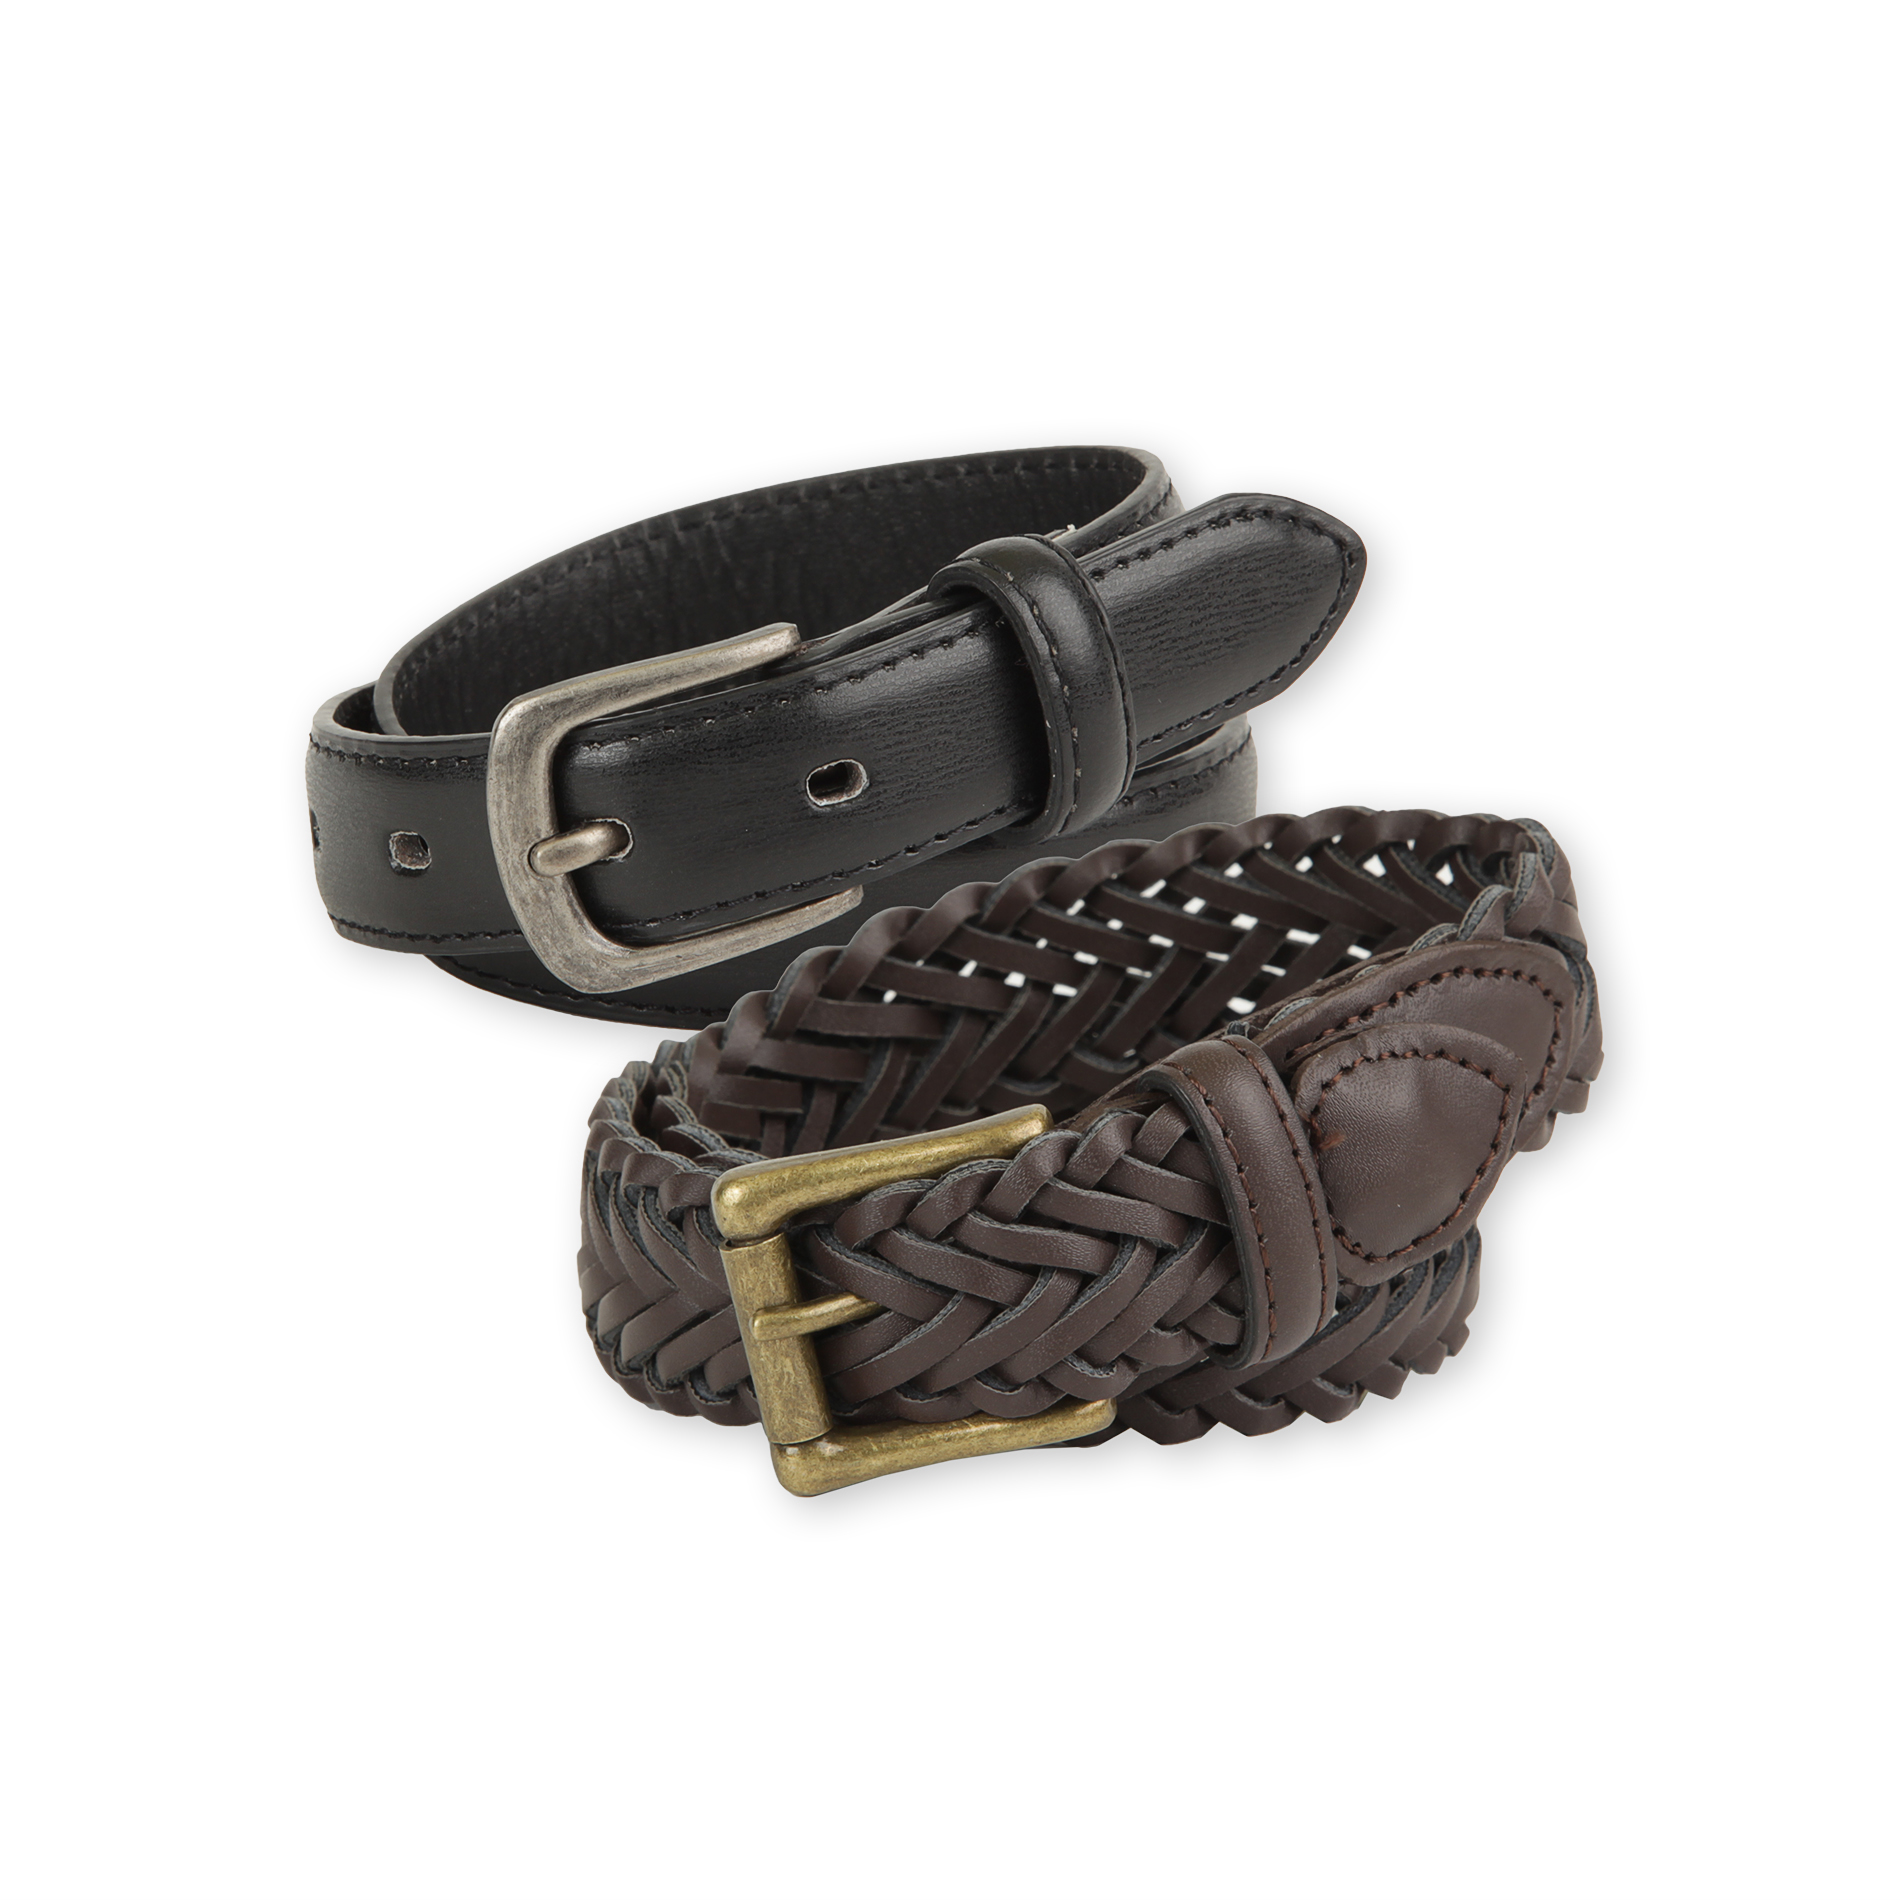 Basic Editions Boy's 2-Pack Leather Belts